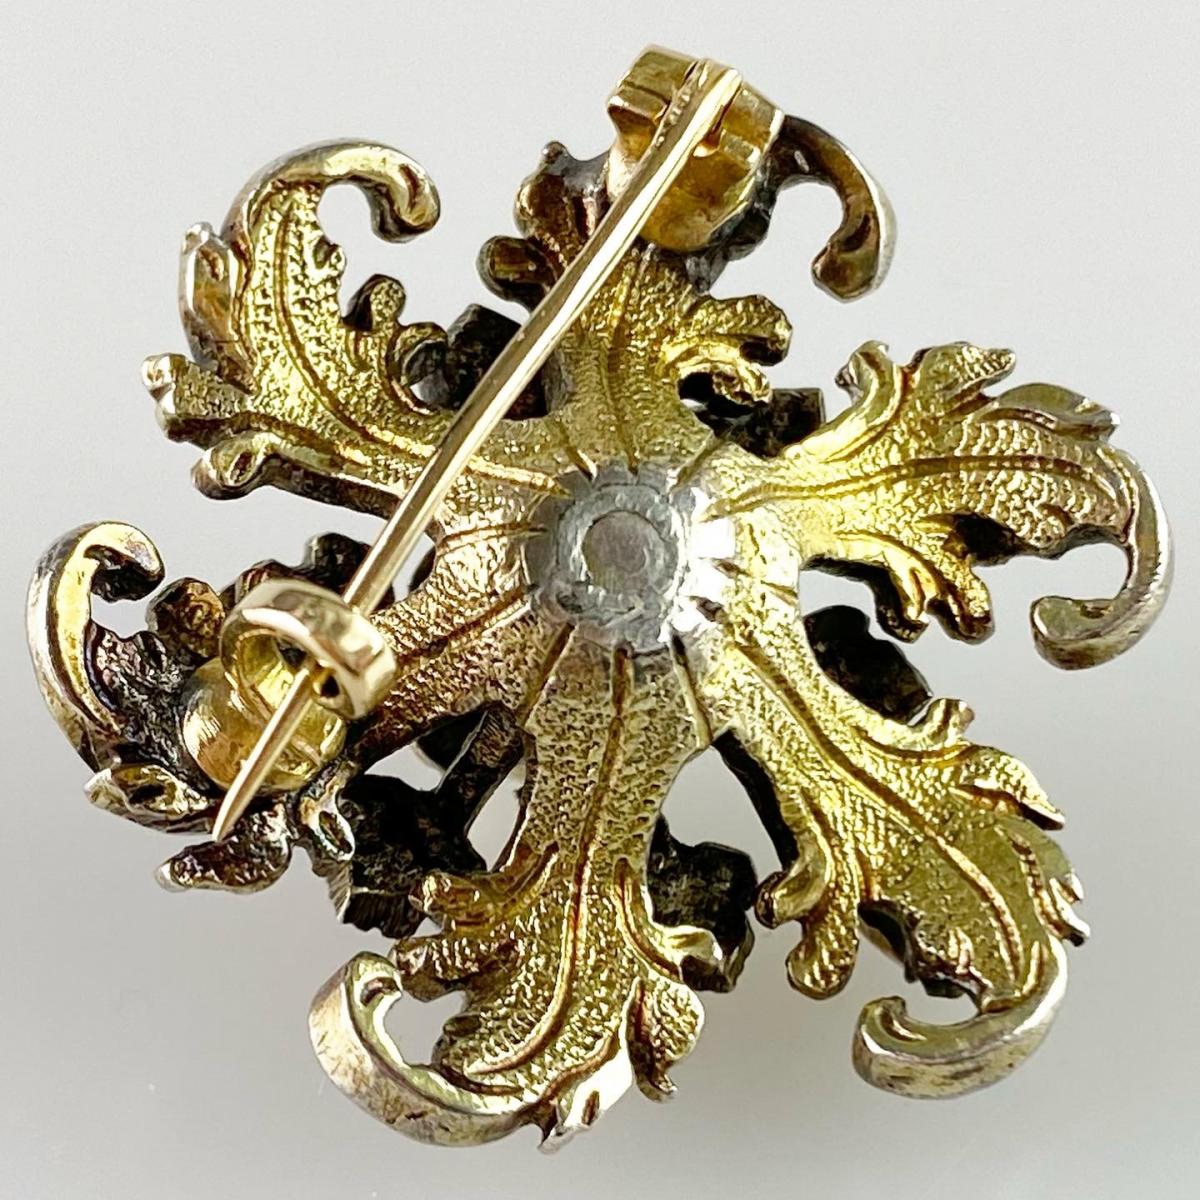 Flower brooch with diamonds & rubies. Spanish, late 17th / early 18th century